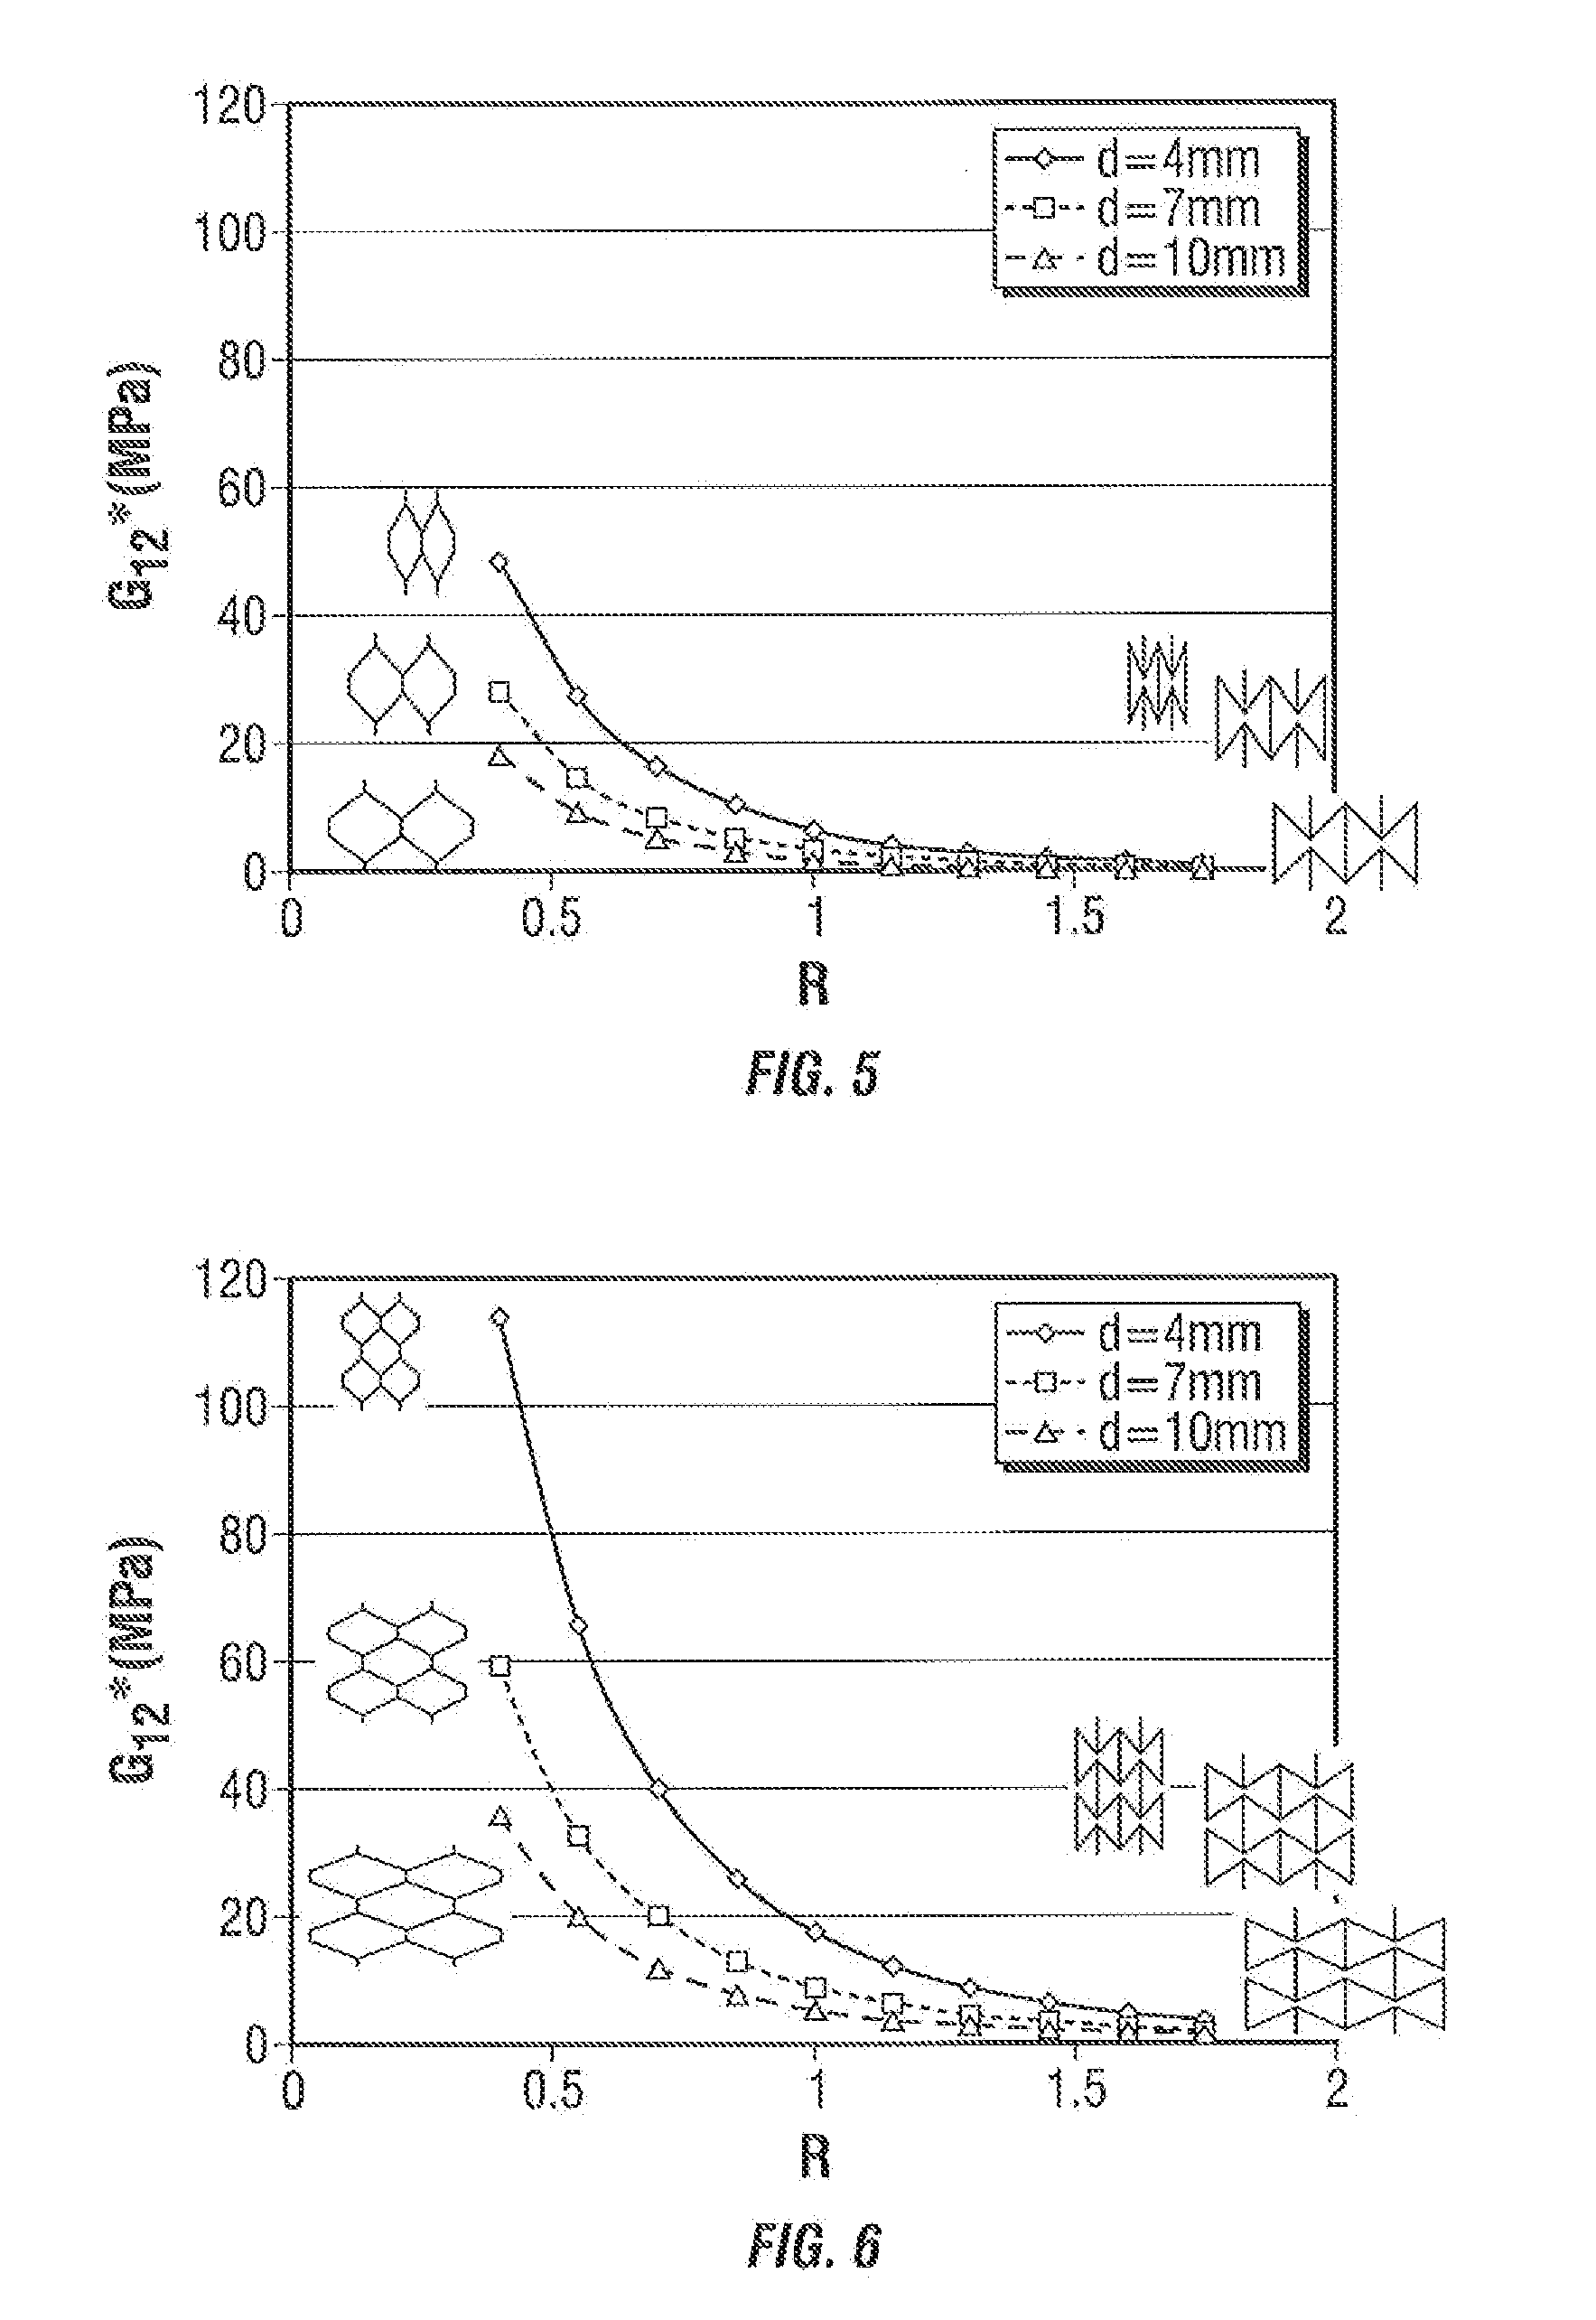 Method to design honeycombs for a shear flexible structure